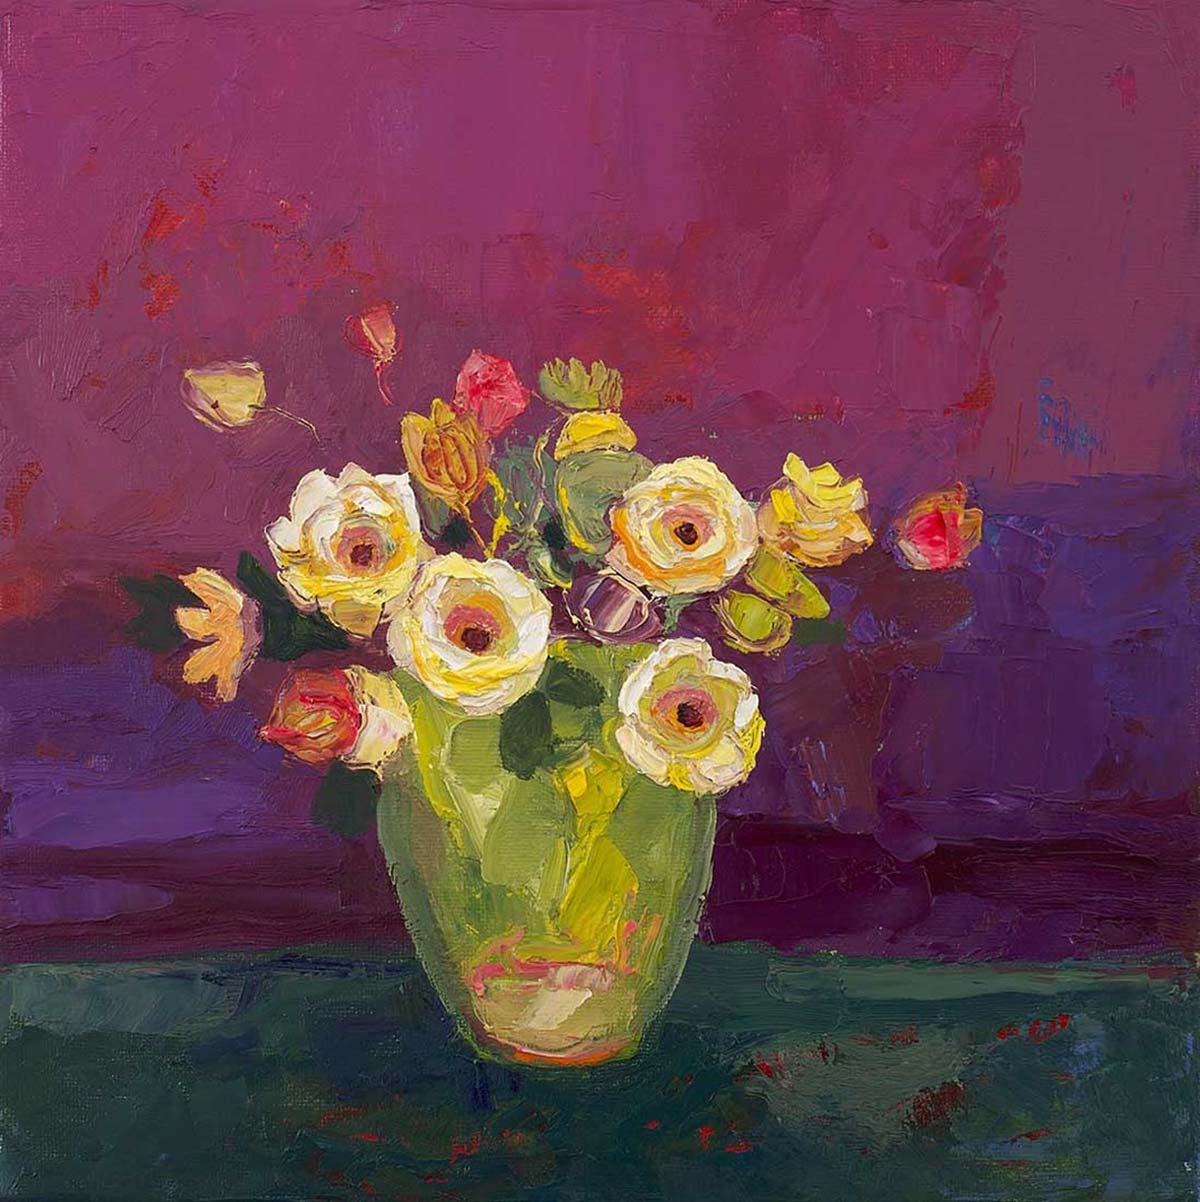 Kirsty Wither's still life painting of flowers will be on show at this year's NT Art Month